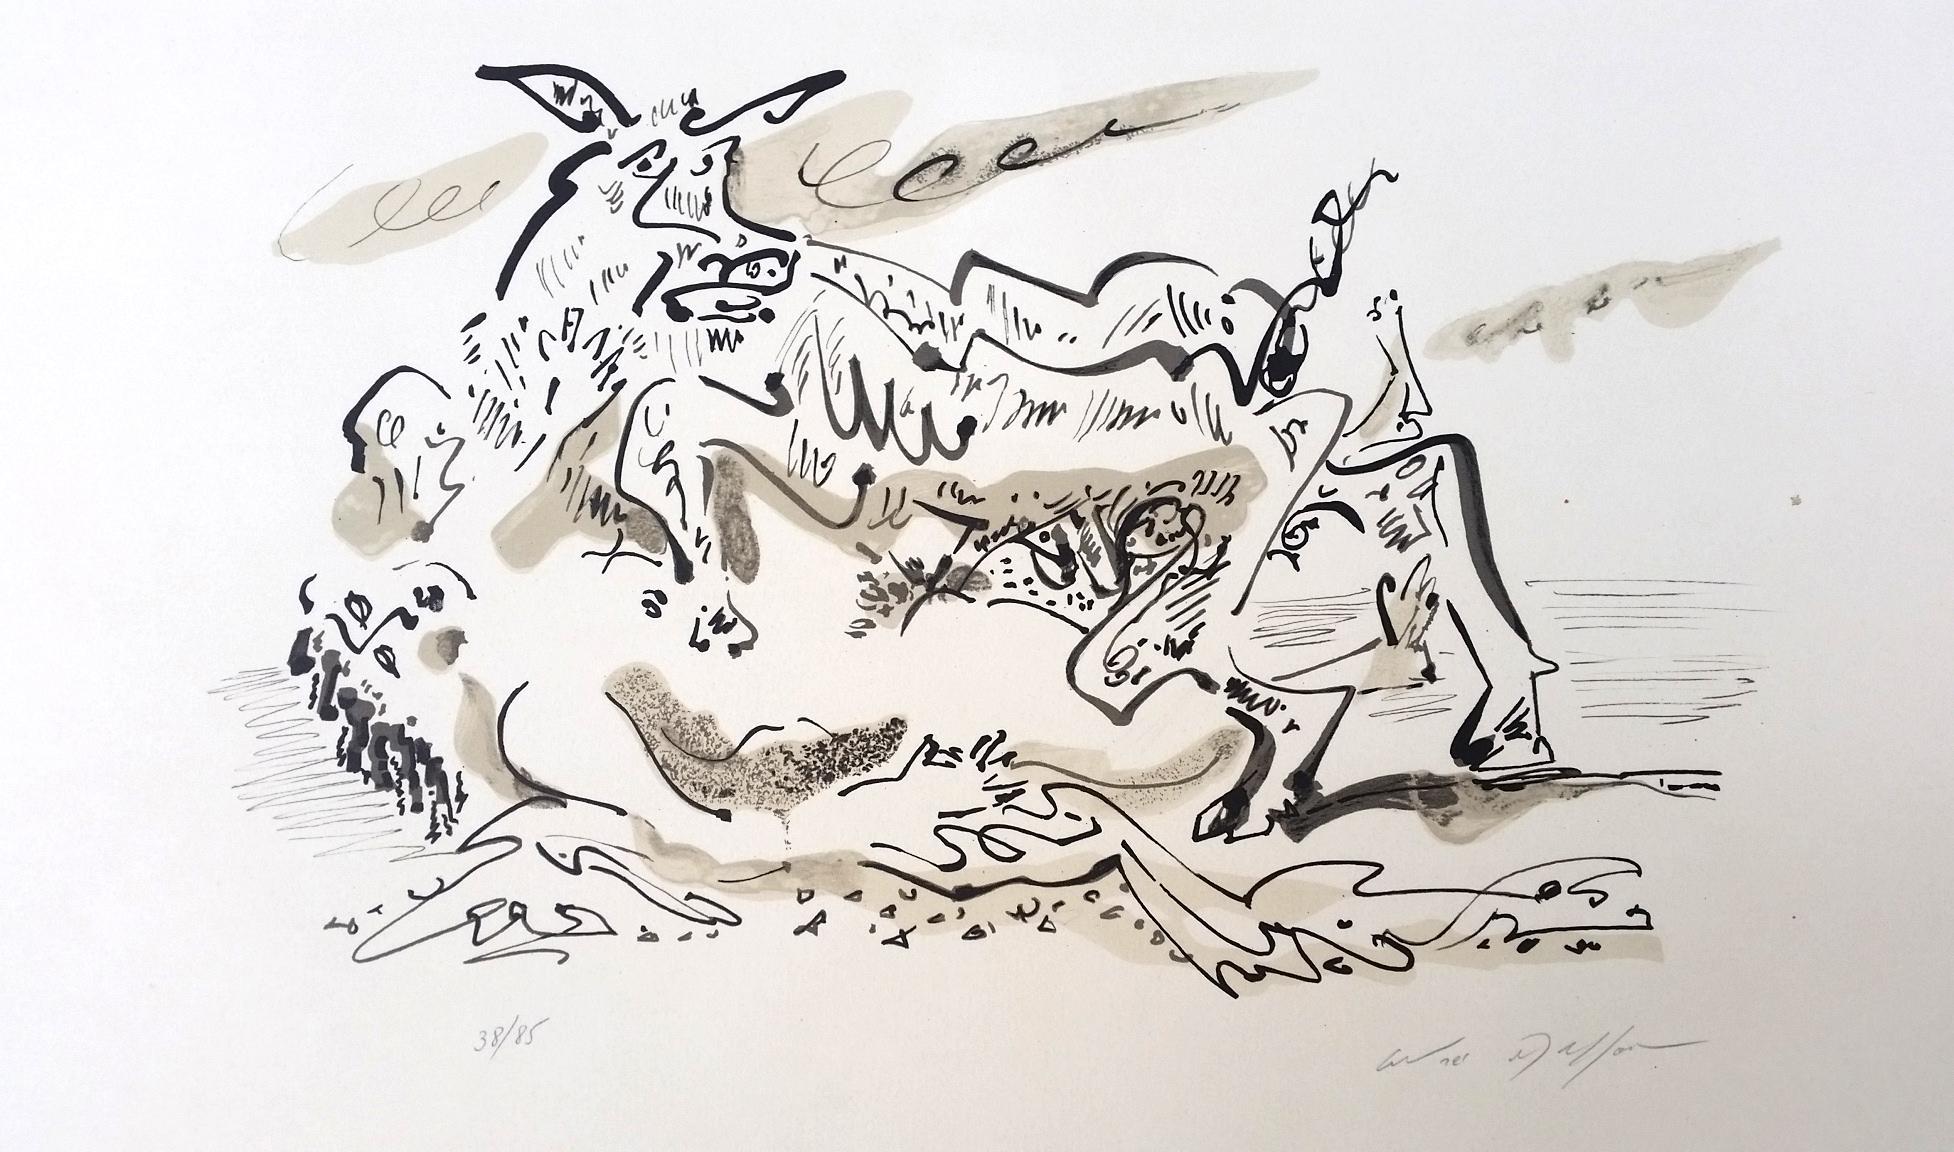 André Masson Figurative Print - The kidnapping of Europe